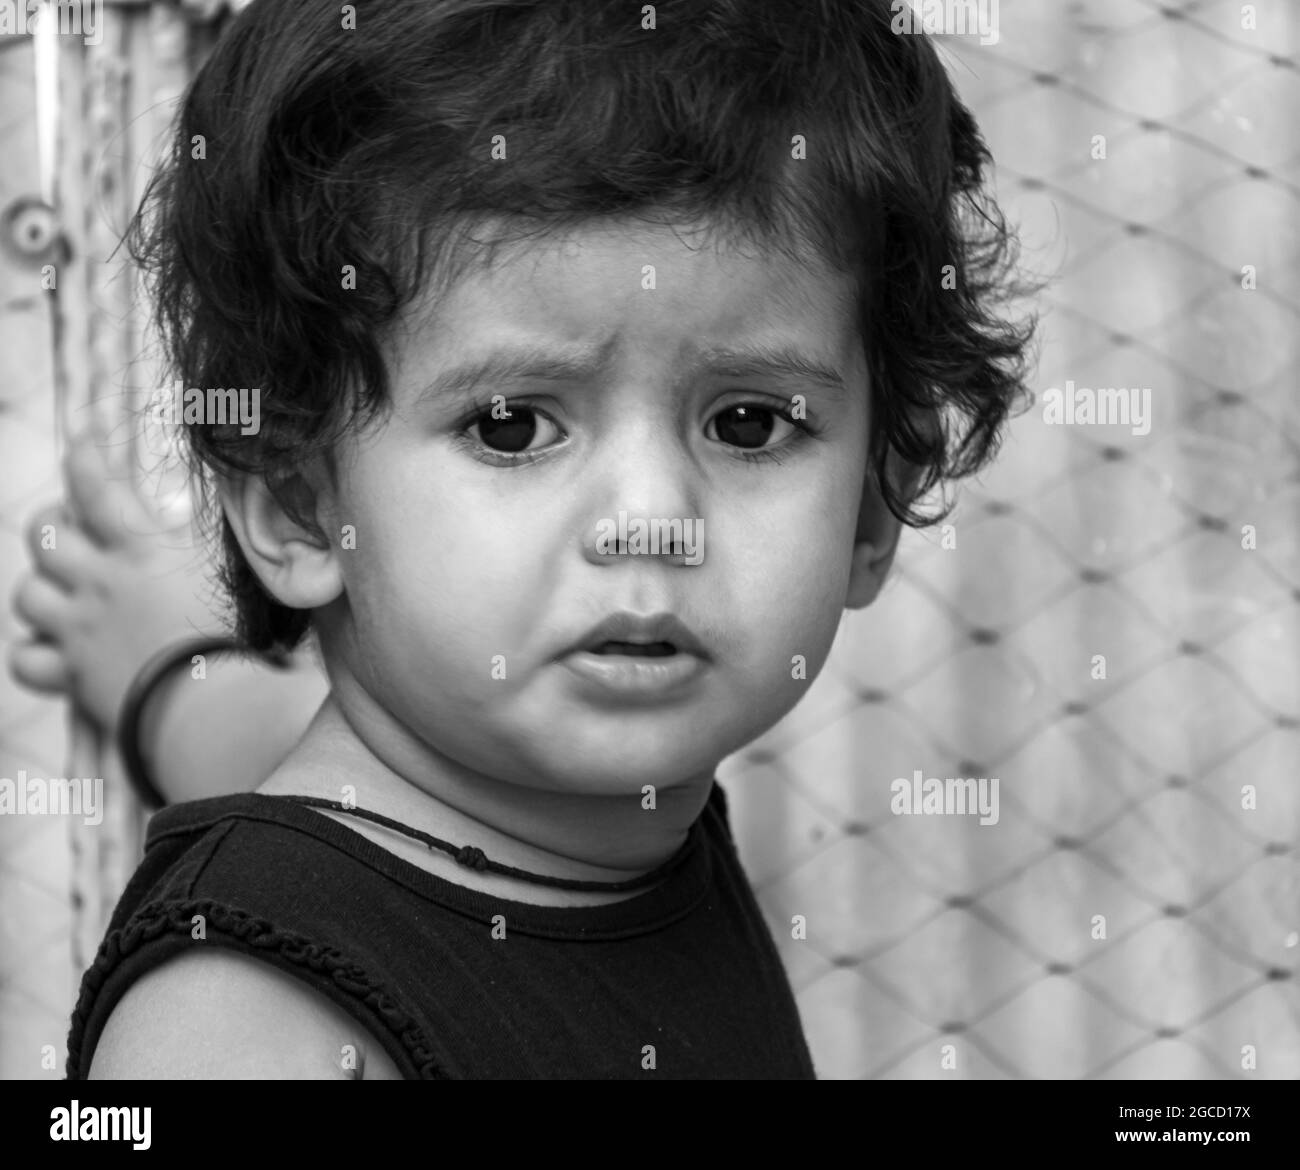 black and white portrait of cute innocent baby. Stock Photo